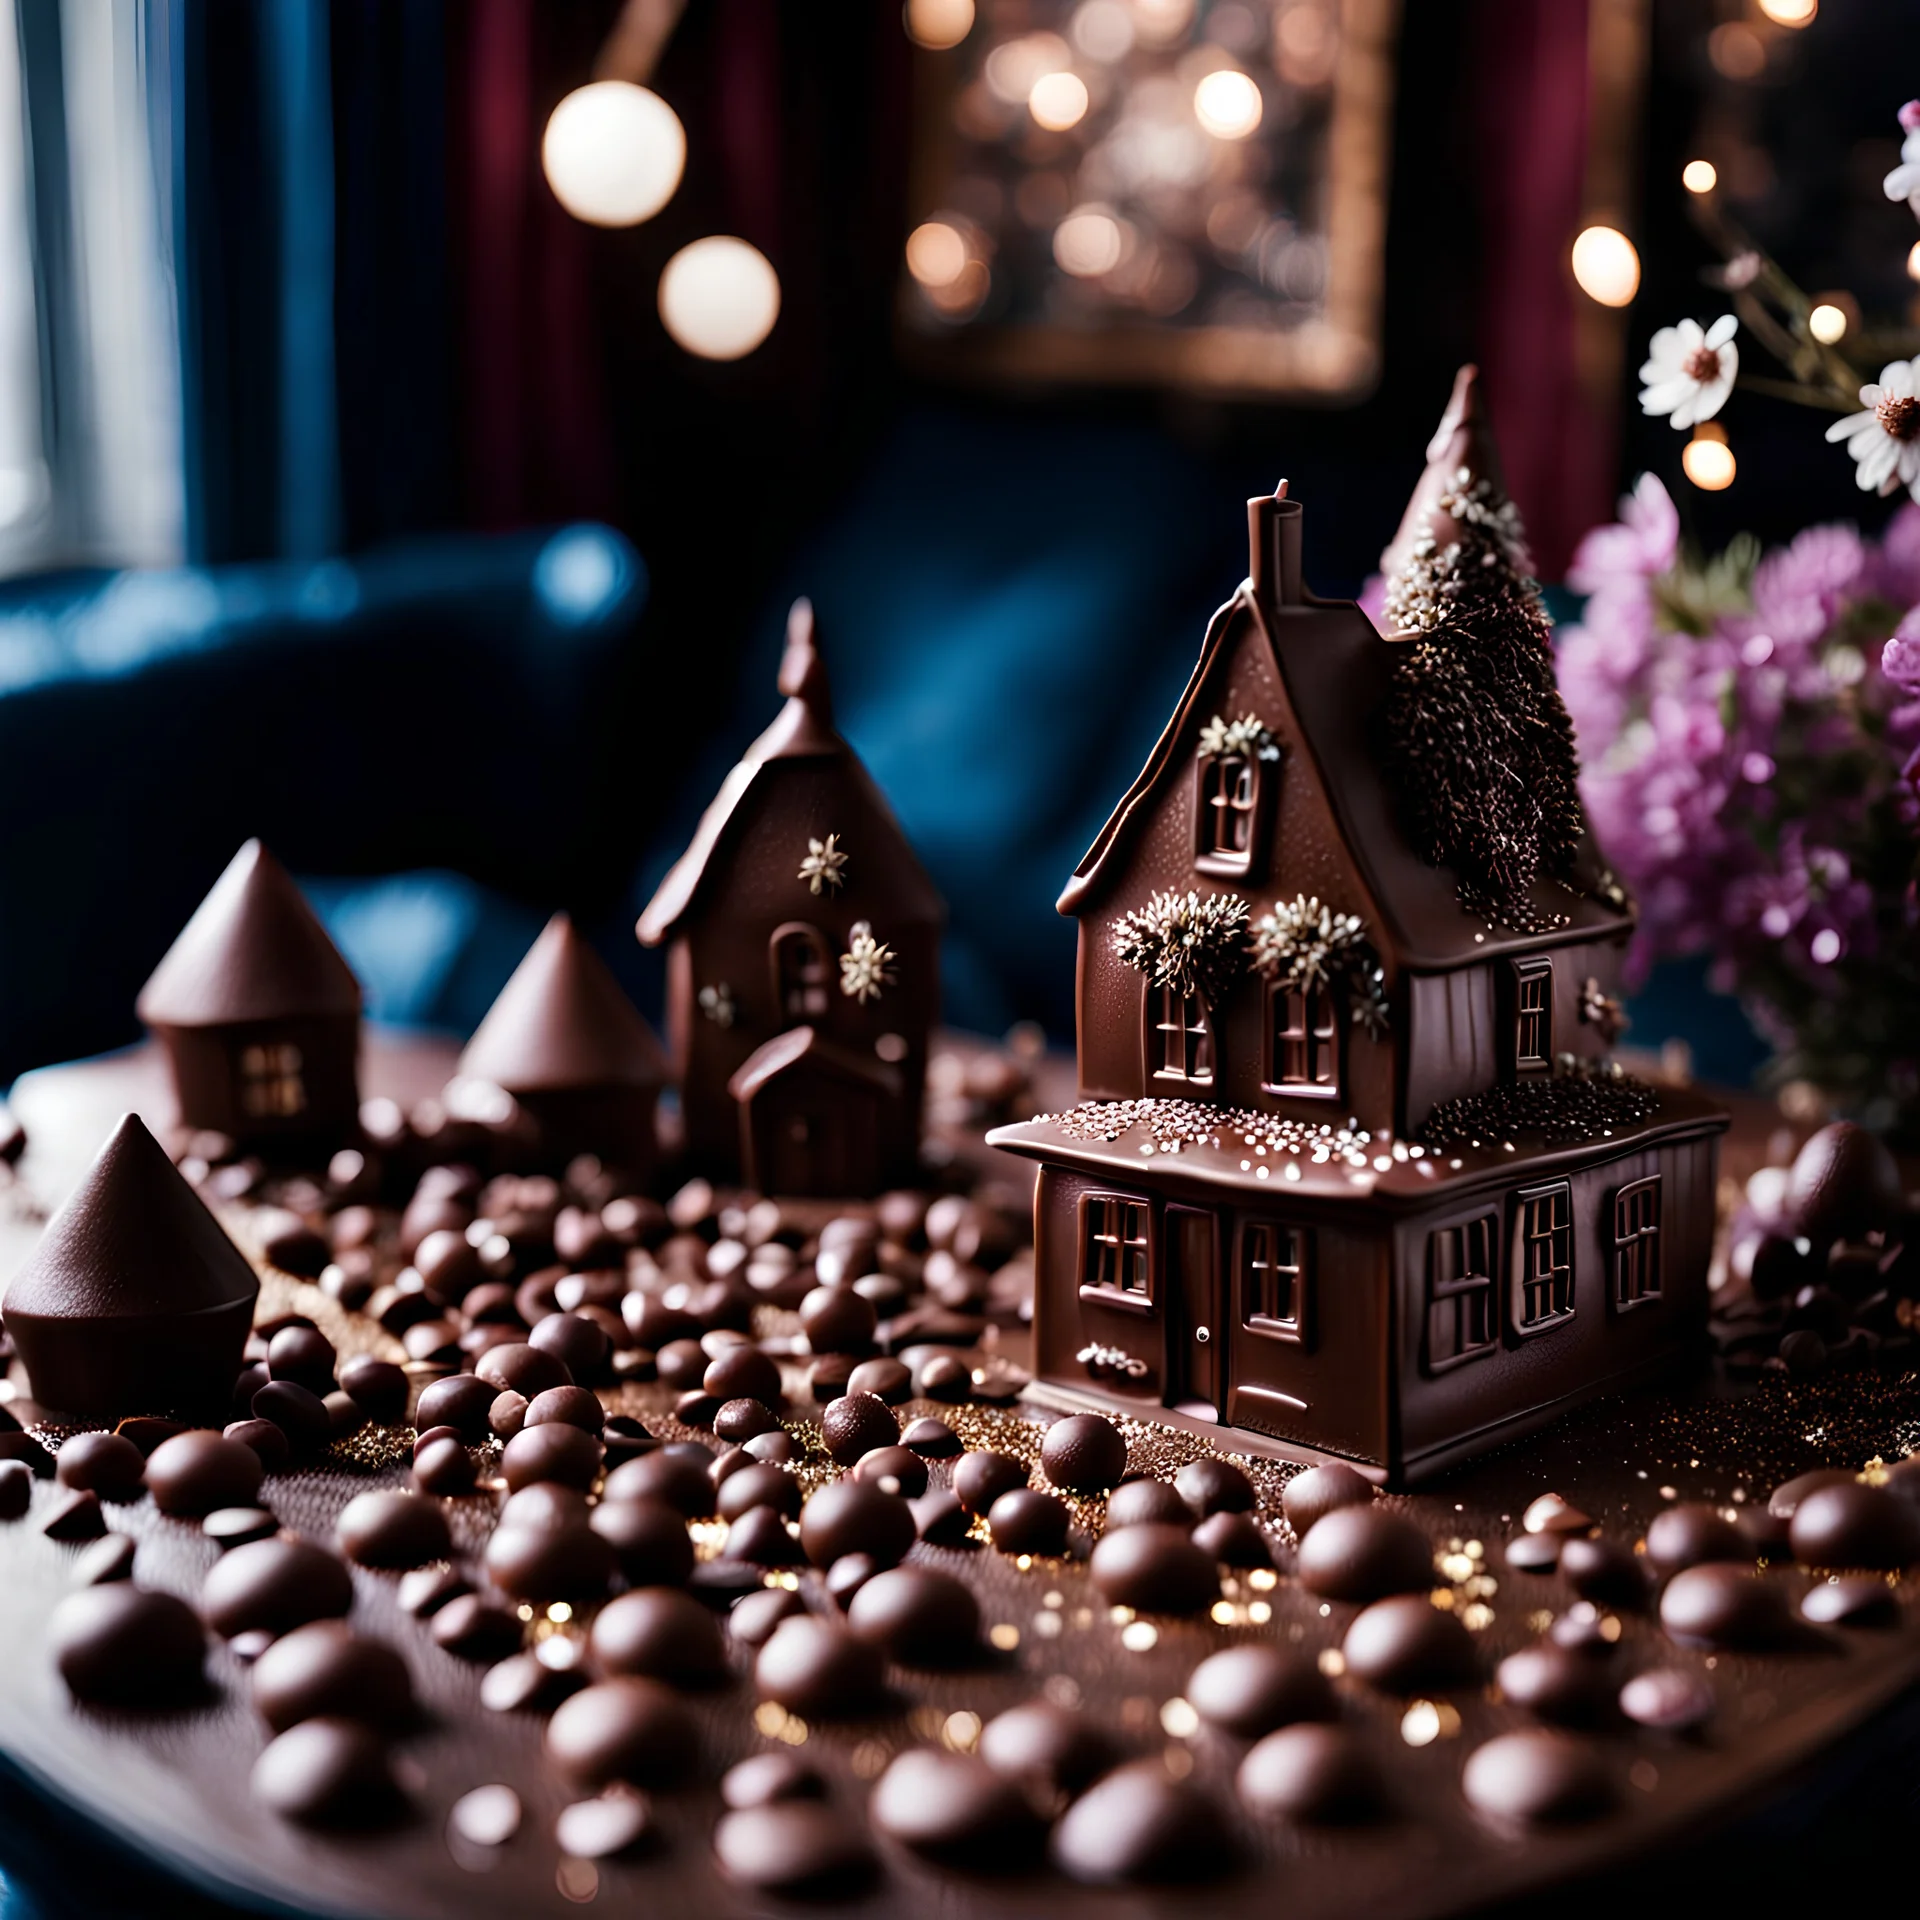 Detailed people, living-room made of milk chocolate, volumetric light flowers, naïve, strong texture, extreme detail, Yves Tanguy, decal, rich moody colors, sparkles, Harry Potter, bokeh, odd, shot on Ilford